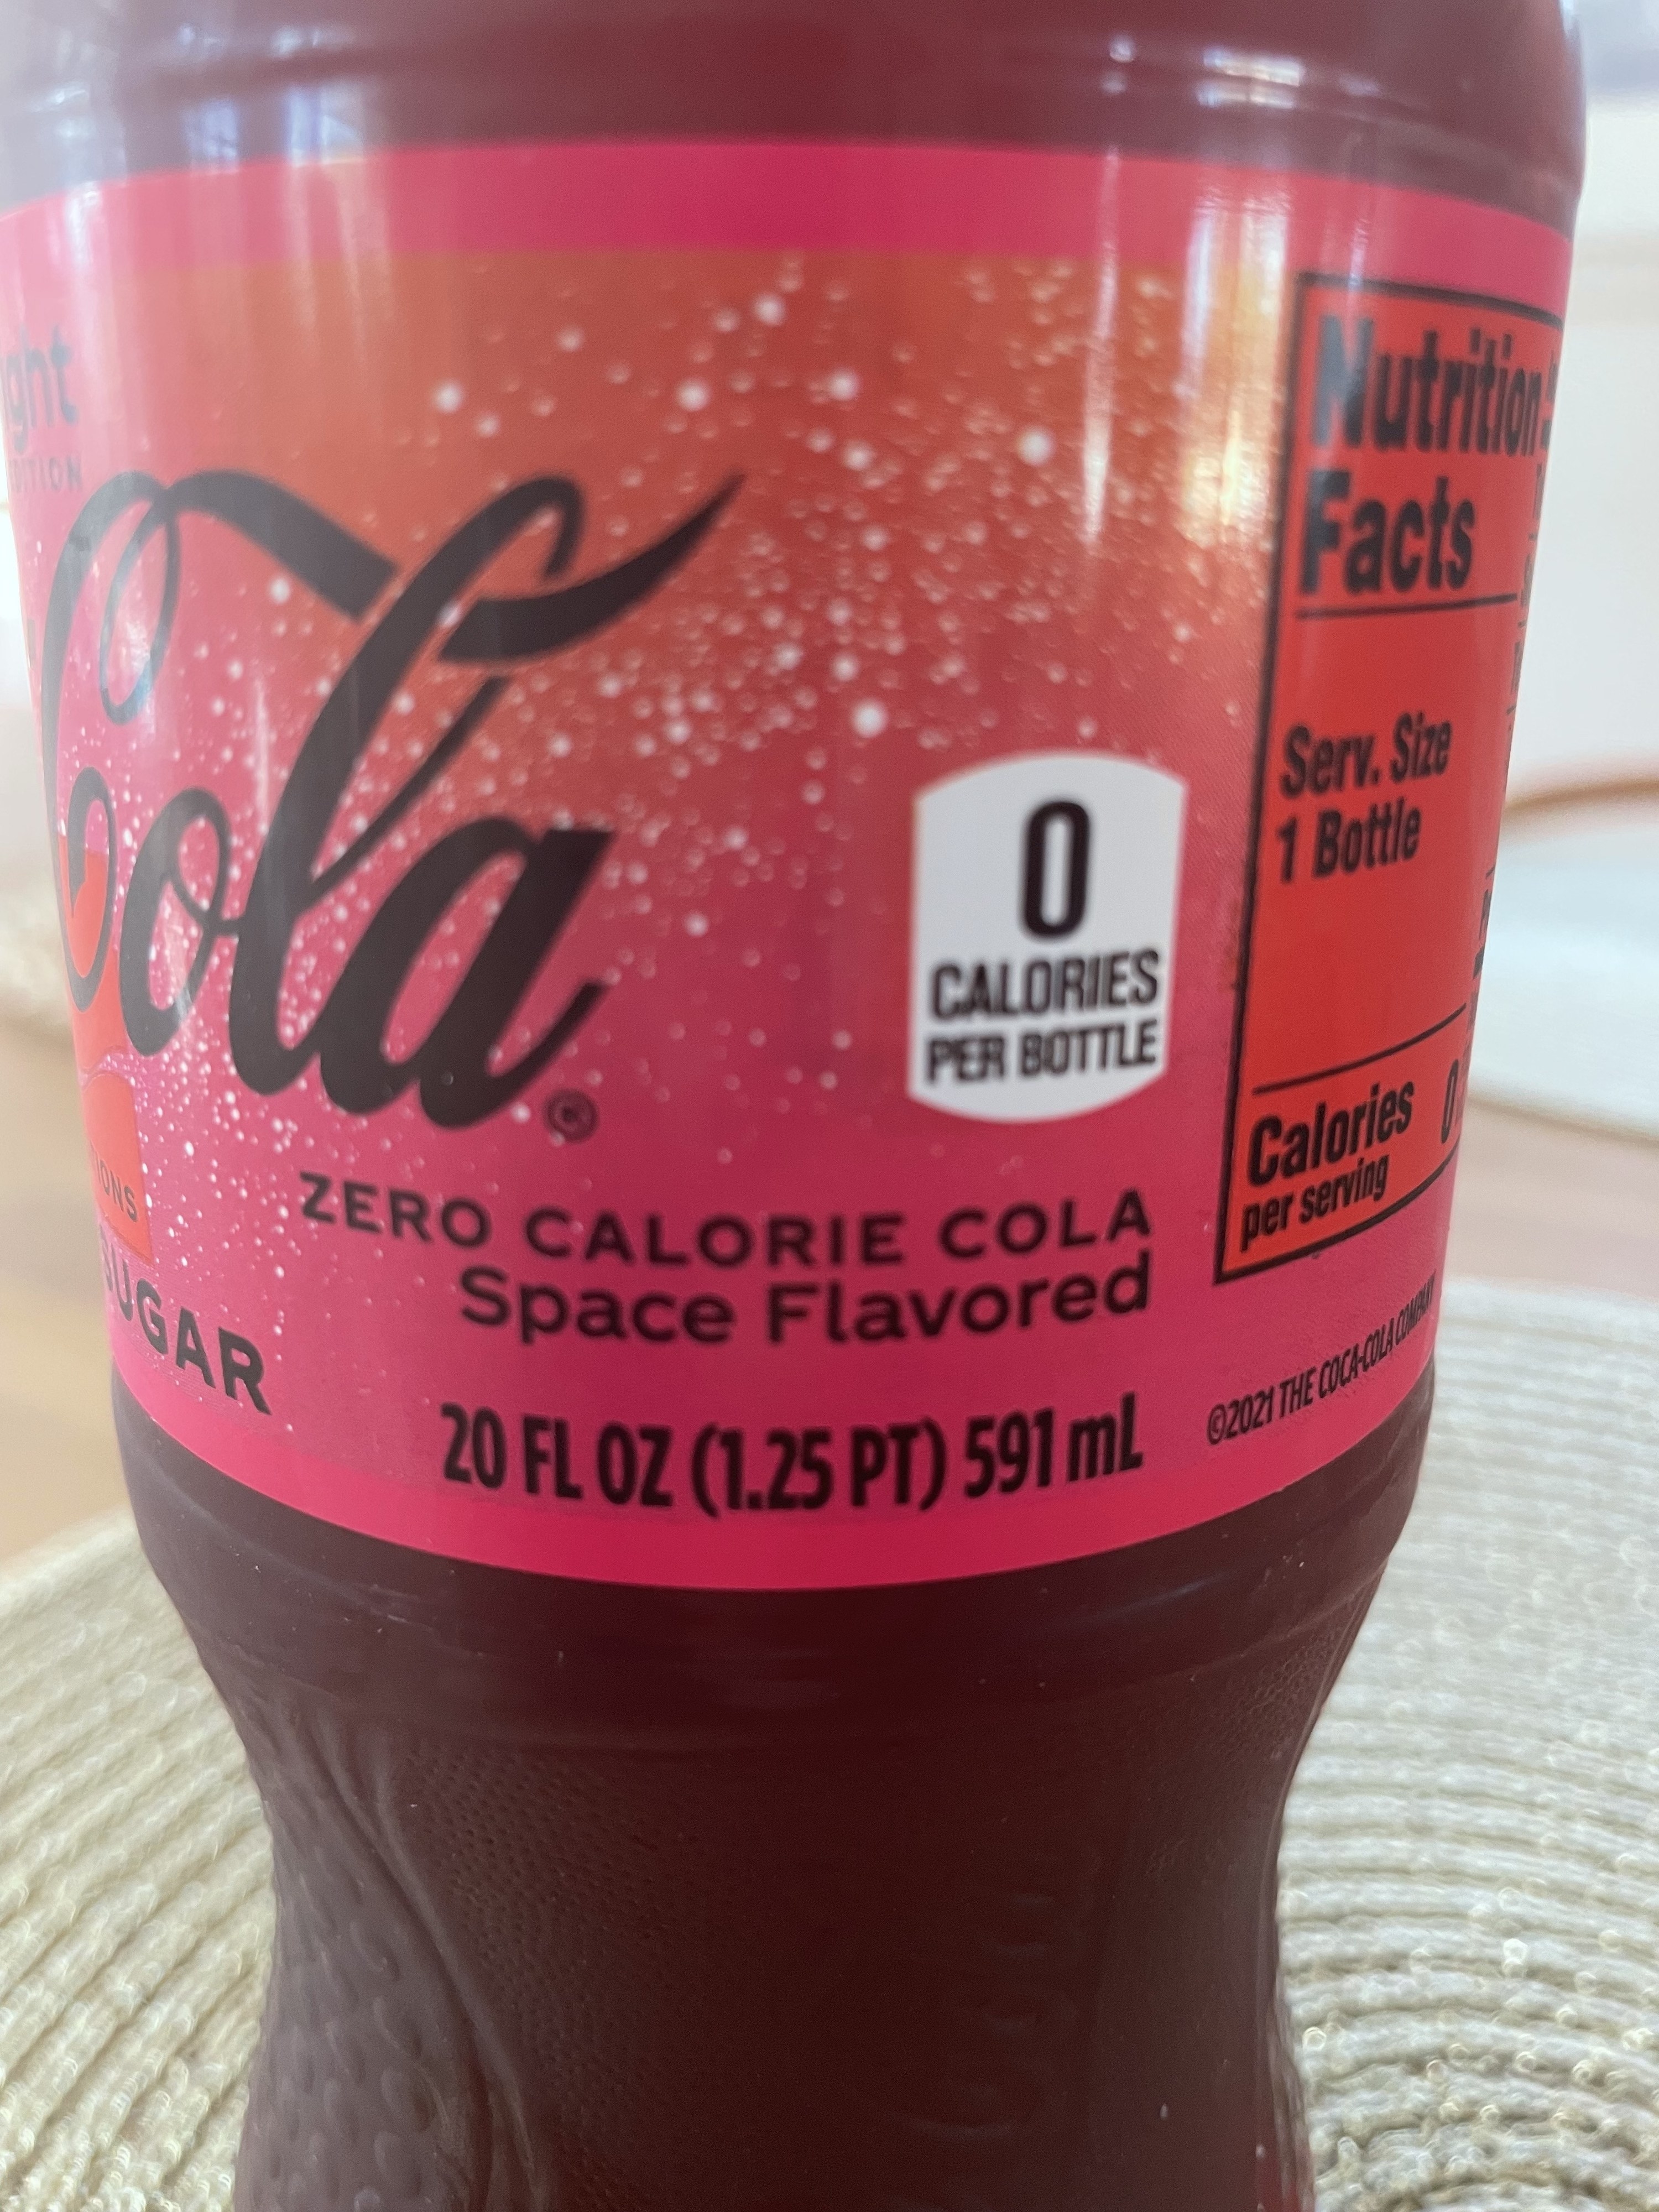 A close-up of the label, which says, &quot;Zero calorie cola, space flavored&quot;